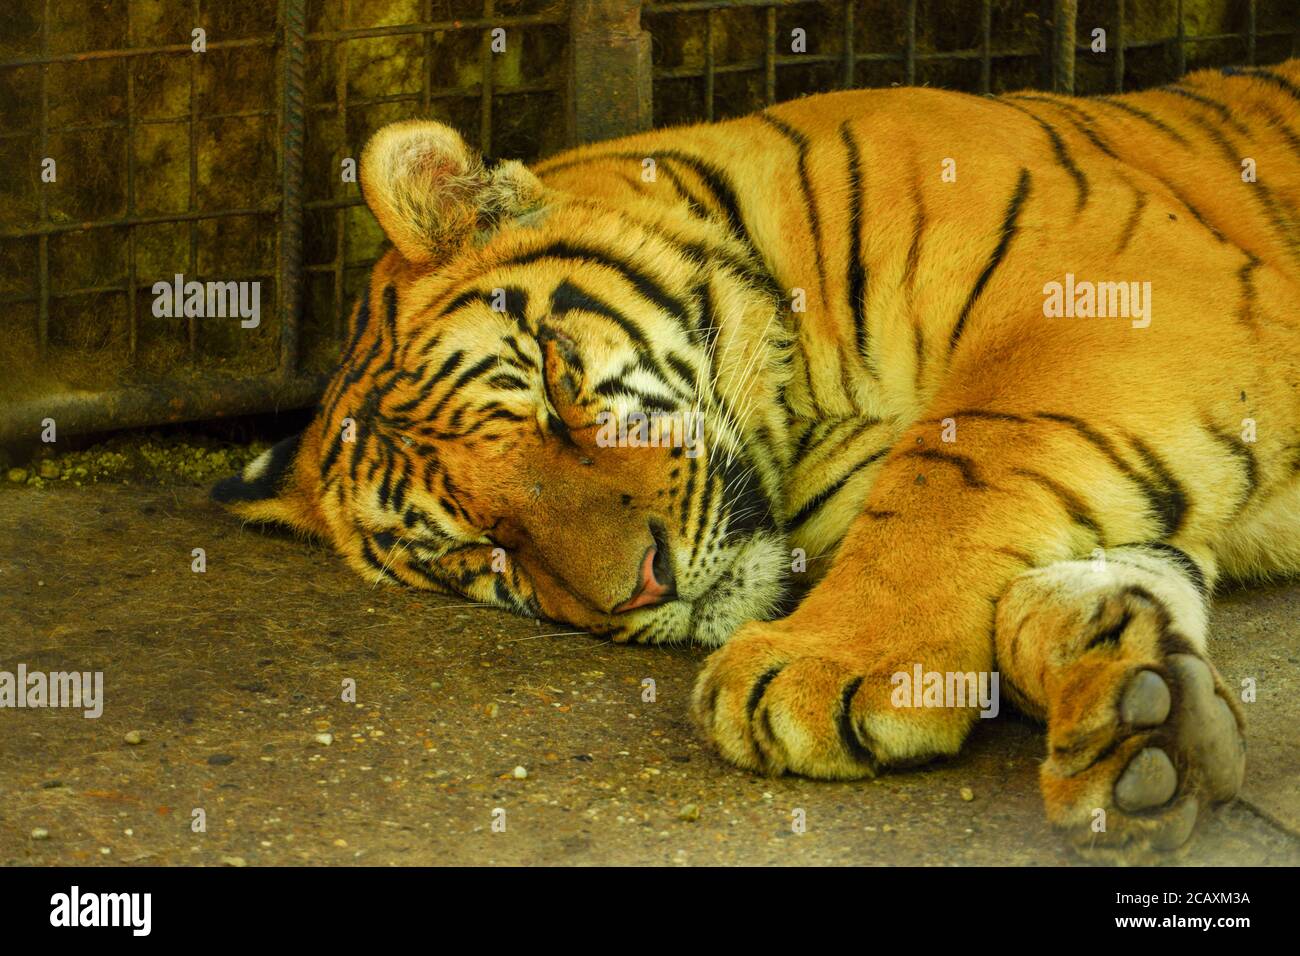 Tiger sleeping on the ground on a sunny day Stock Photo